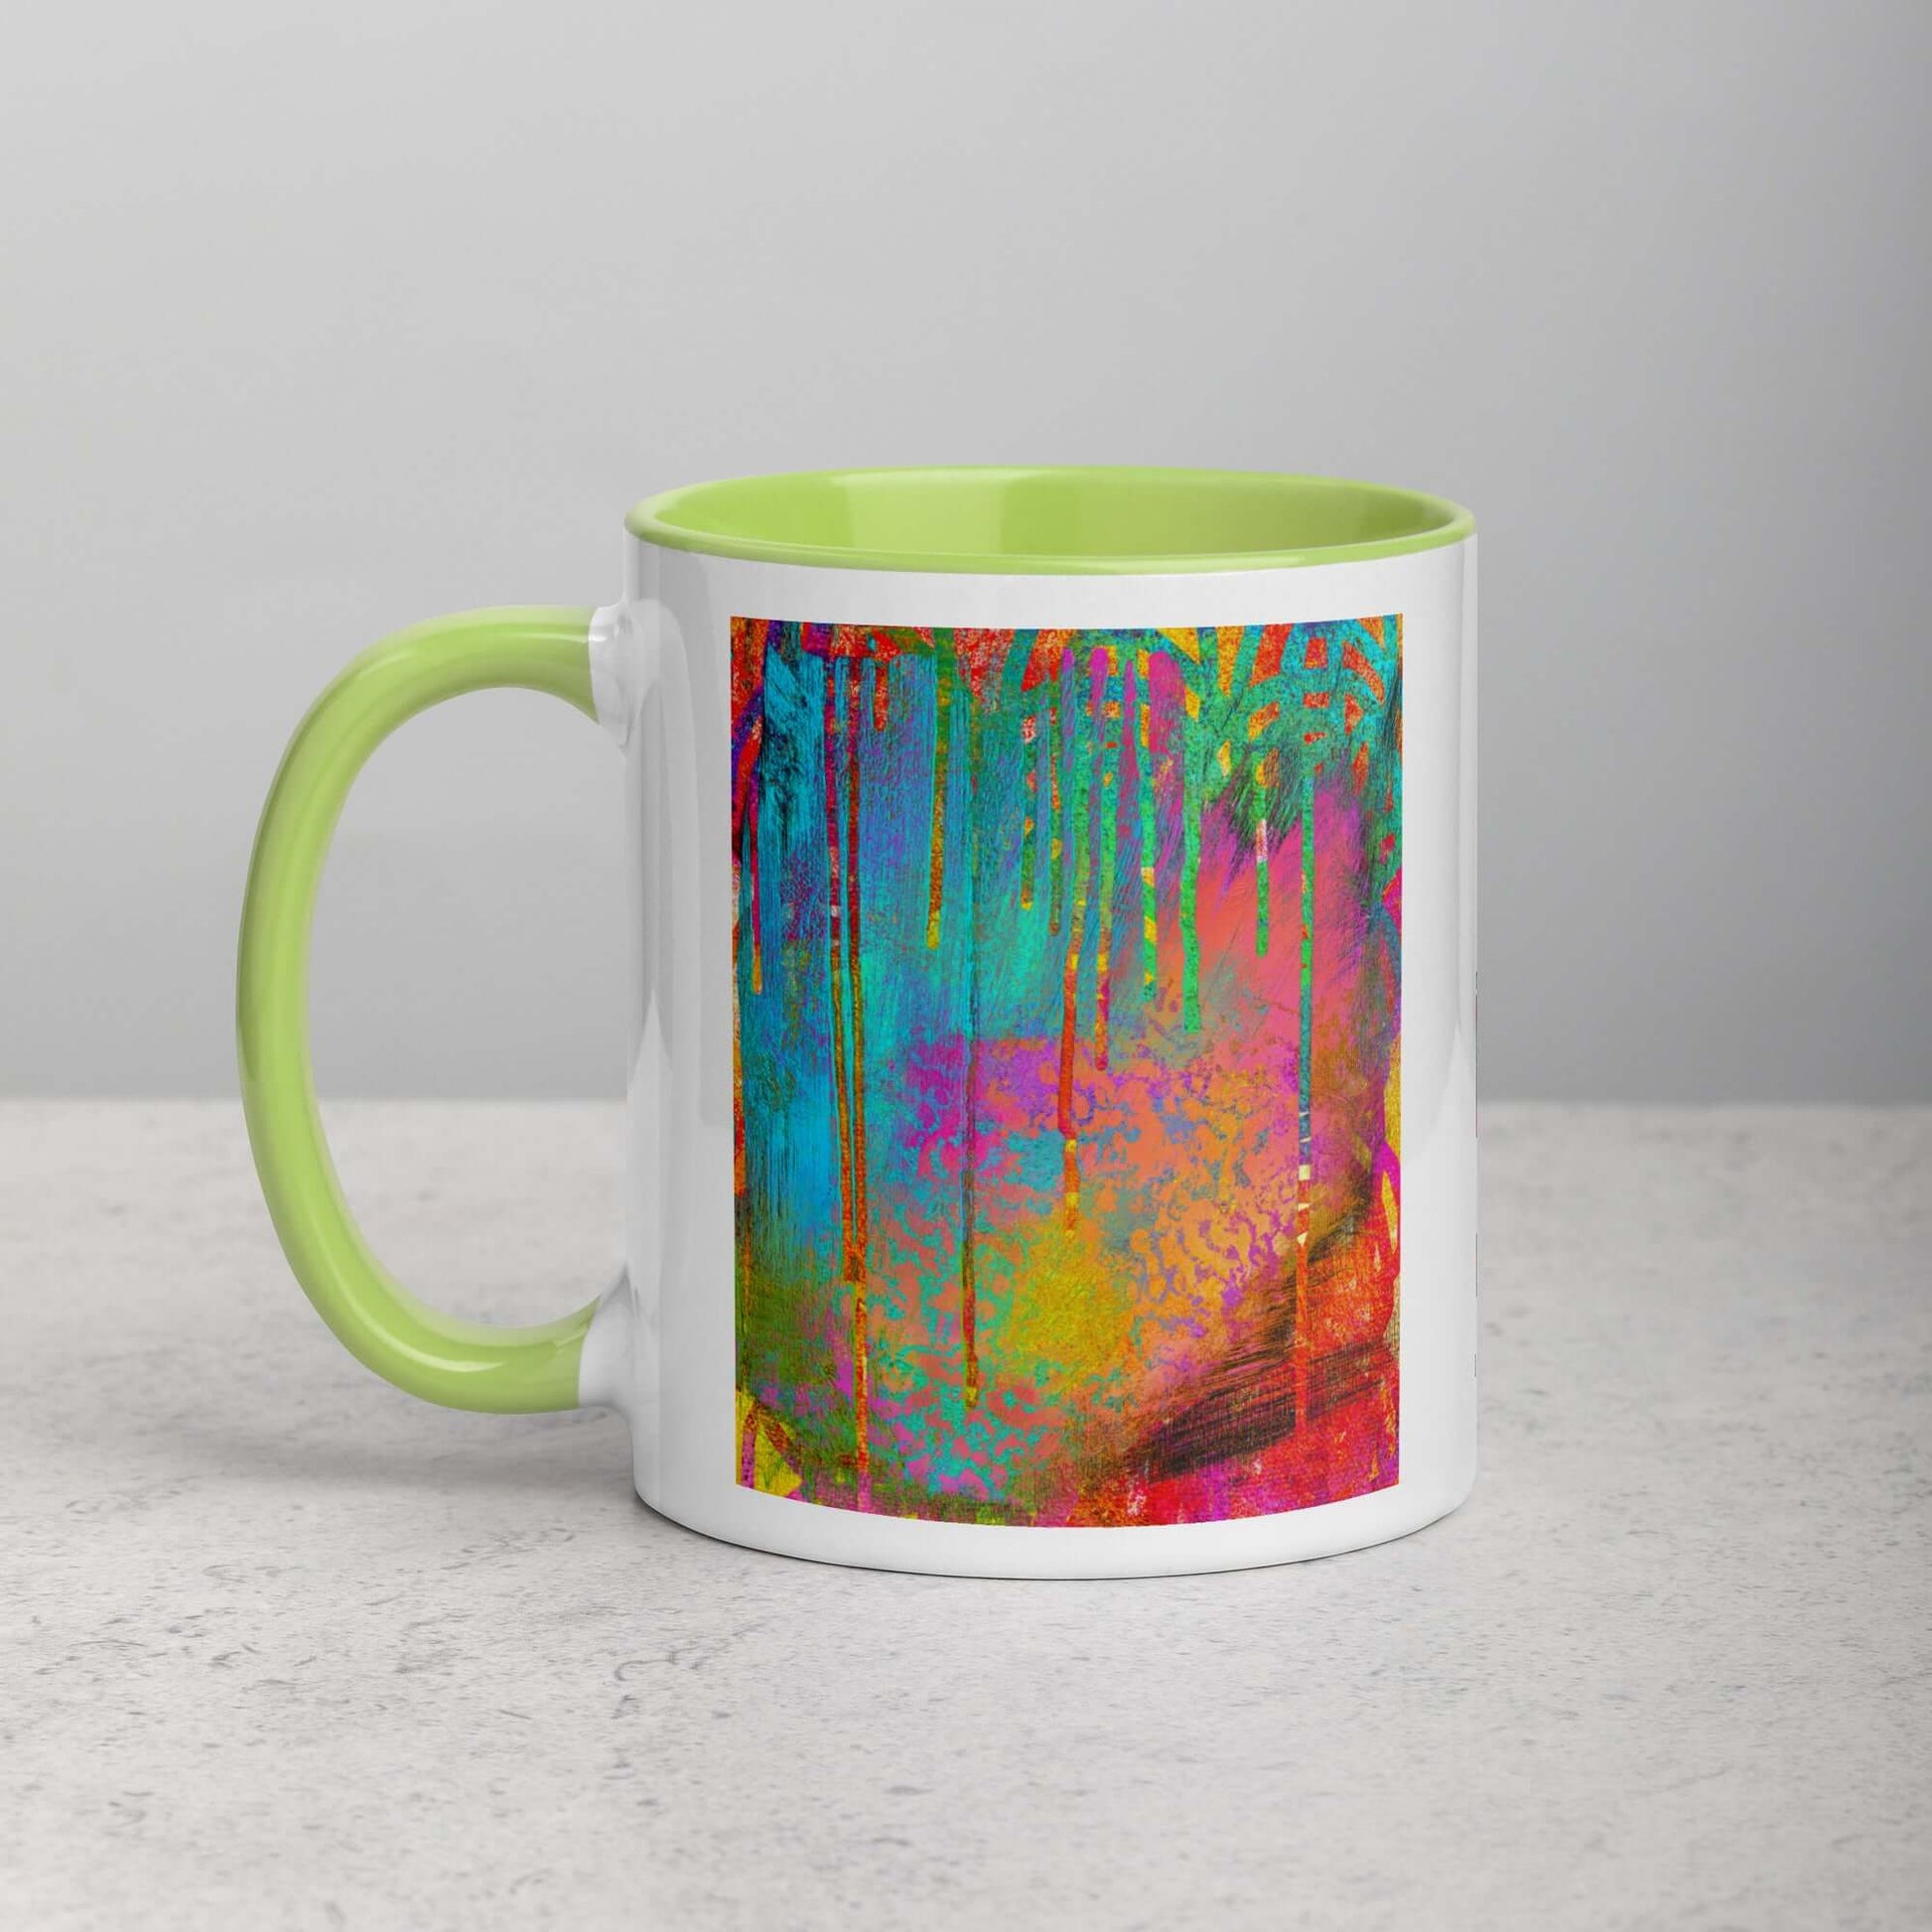 Paint Drips on Colorful Background “Into the Beyond” Abstract Art Mug with Lime Green Color Inside Left Handed Front View